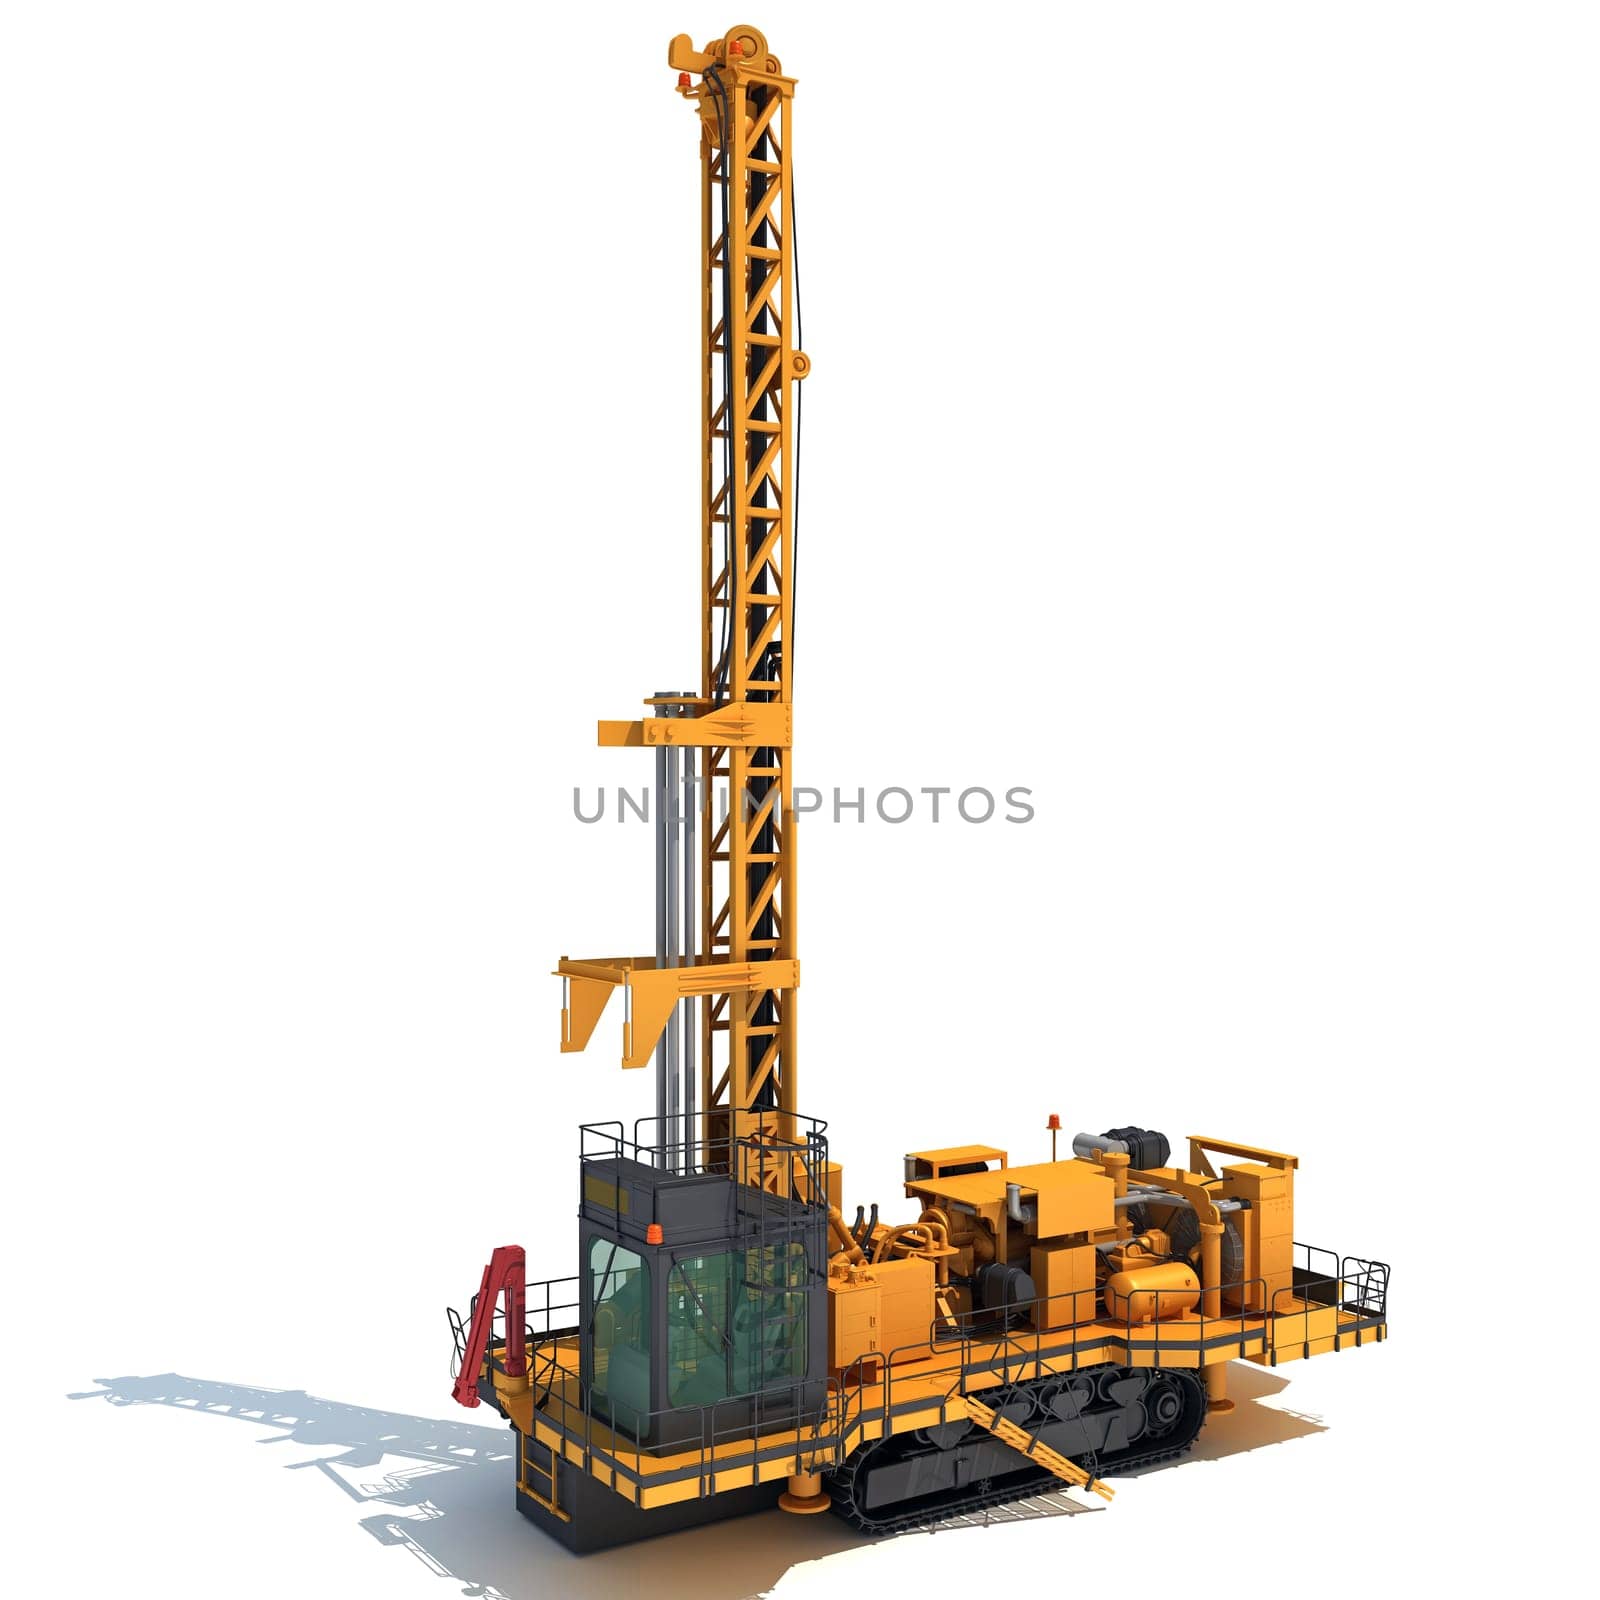 Drilling Rig heavy construction machinery 3D rendering on white background by 3DHorse